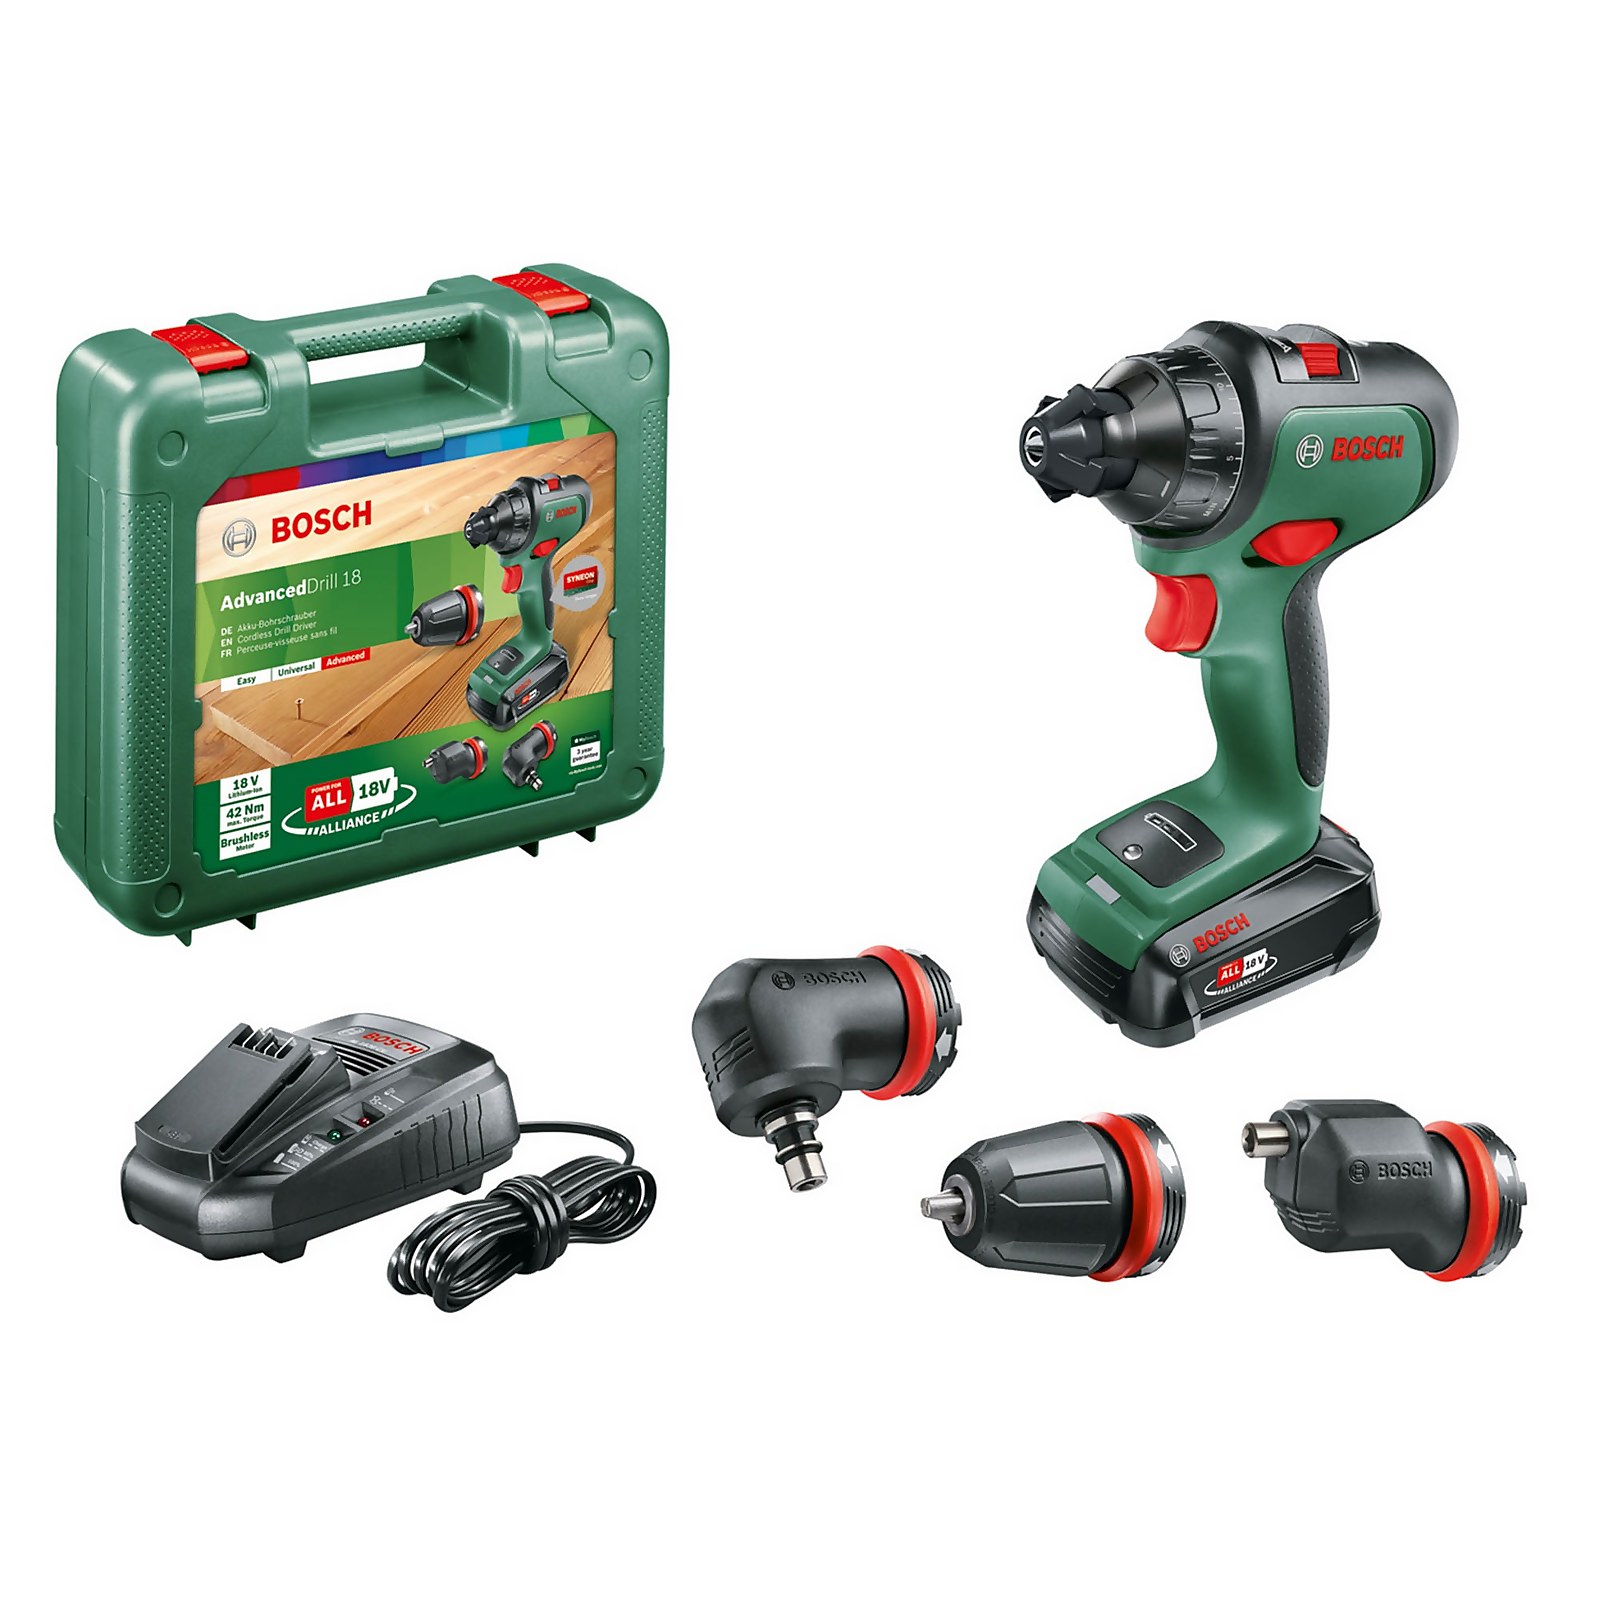 Photo of Bosch Advanceddrill 18 With 1 X 2.5 Ah Battery- Charger And 3 Attachment Set